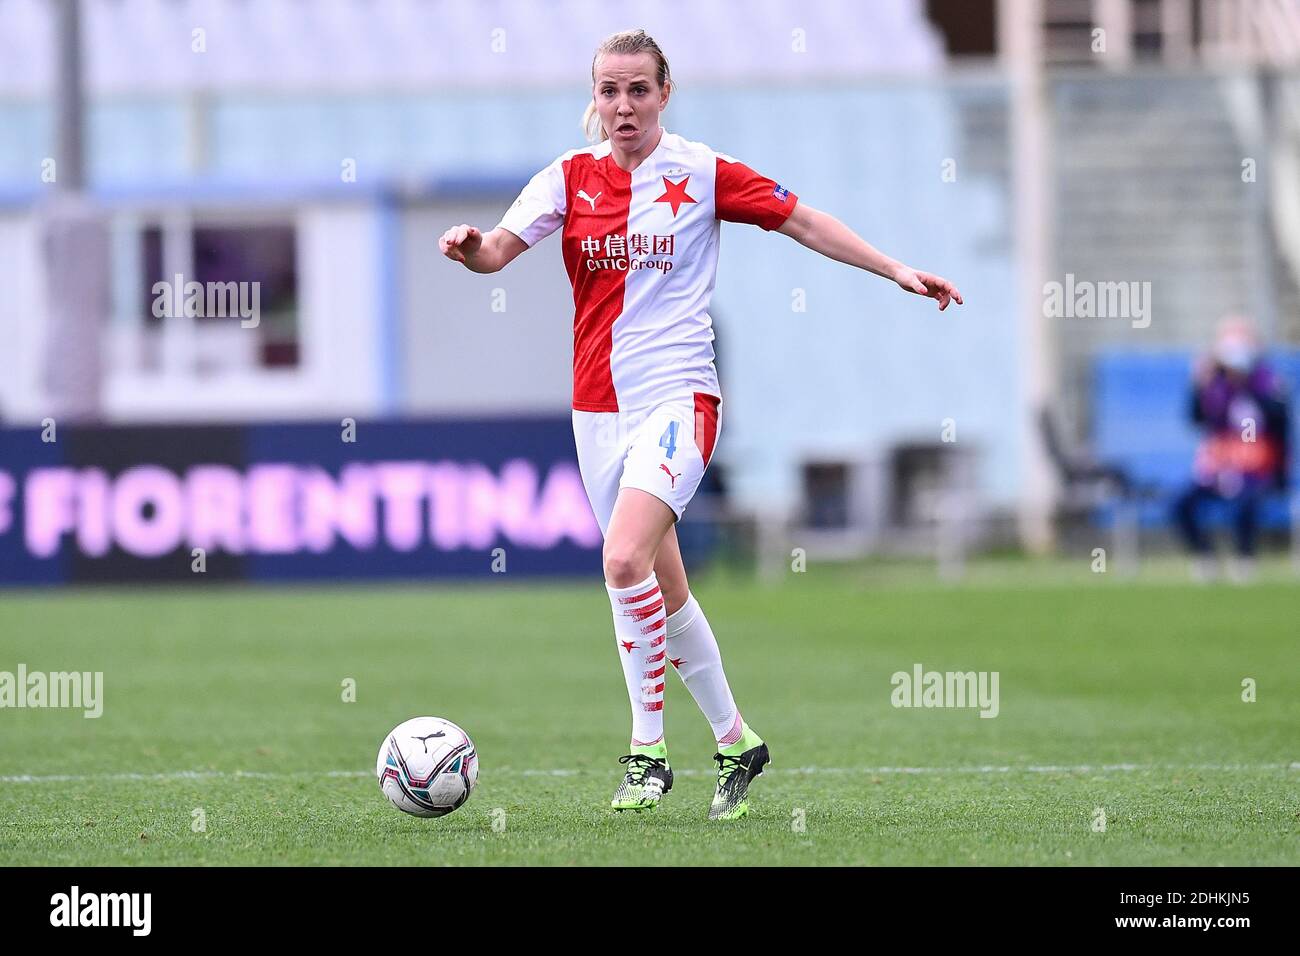 Kristyna Ruzickova of Slavia Praha challenges for the ball with